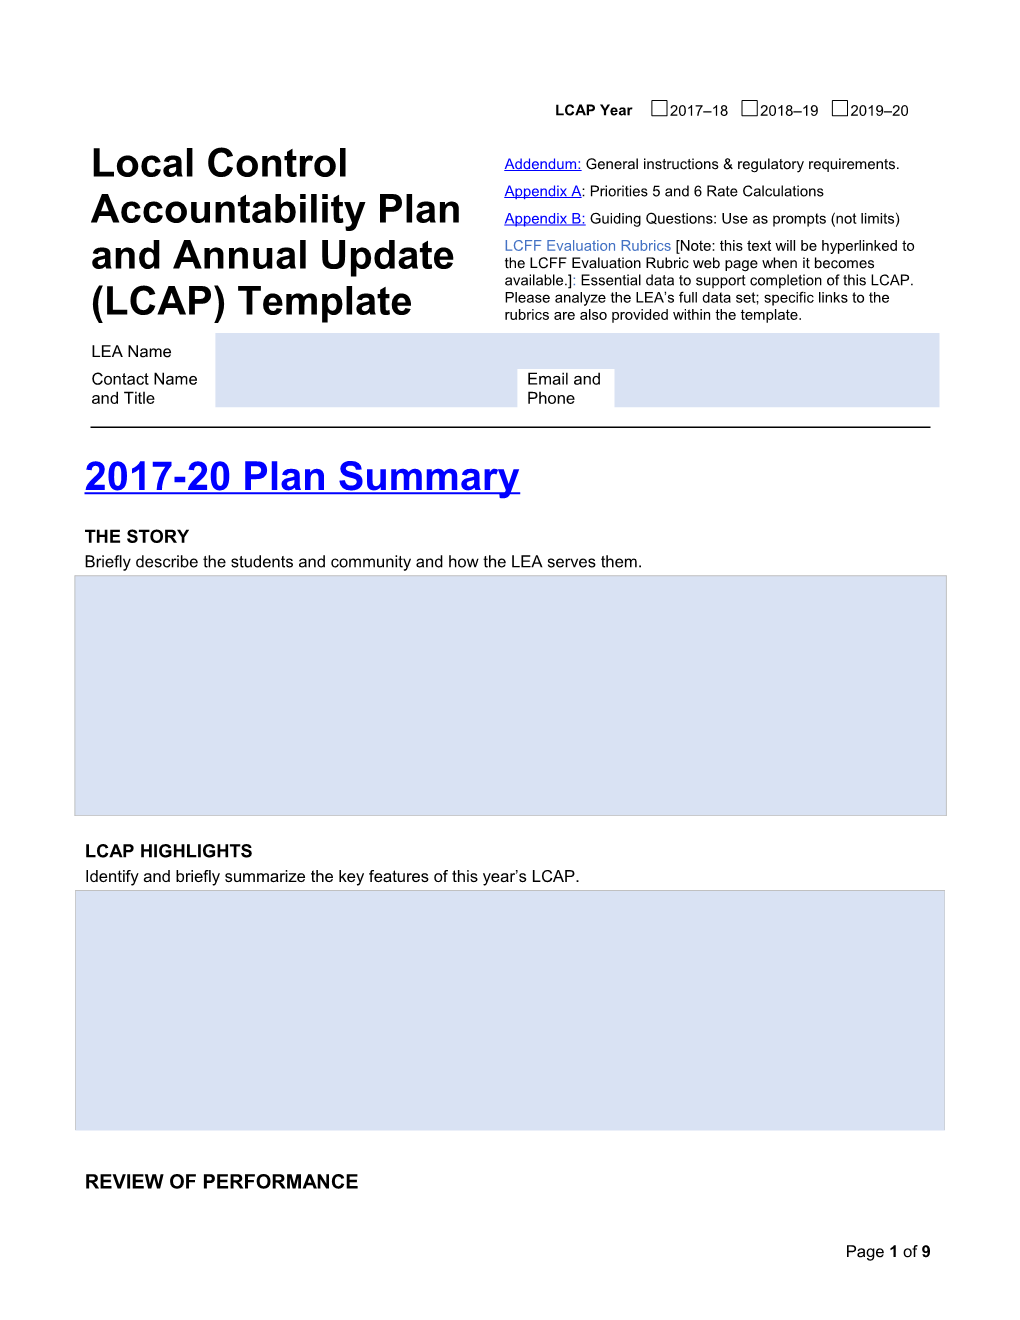 LCAP and Annual Update Template - Local Control Funding Formula (CA Dept of Education)